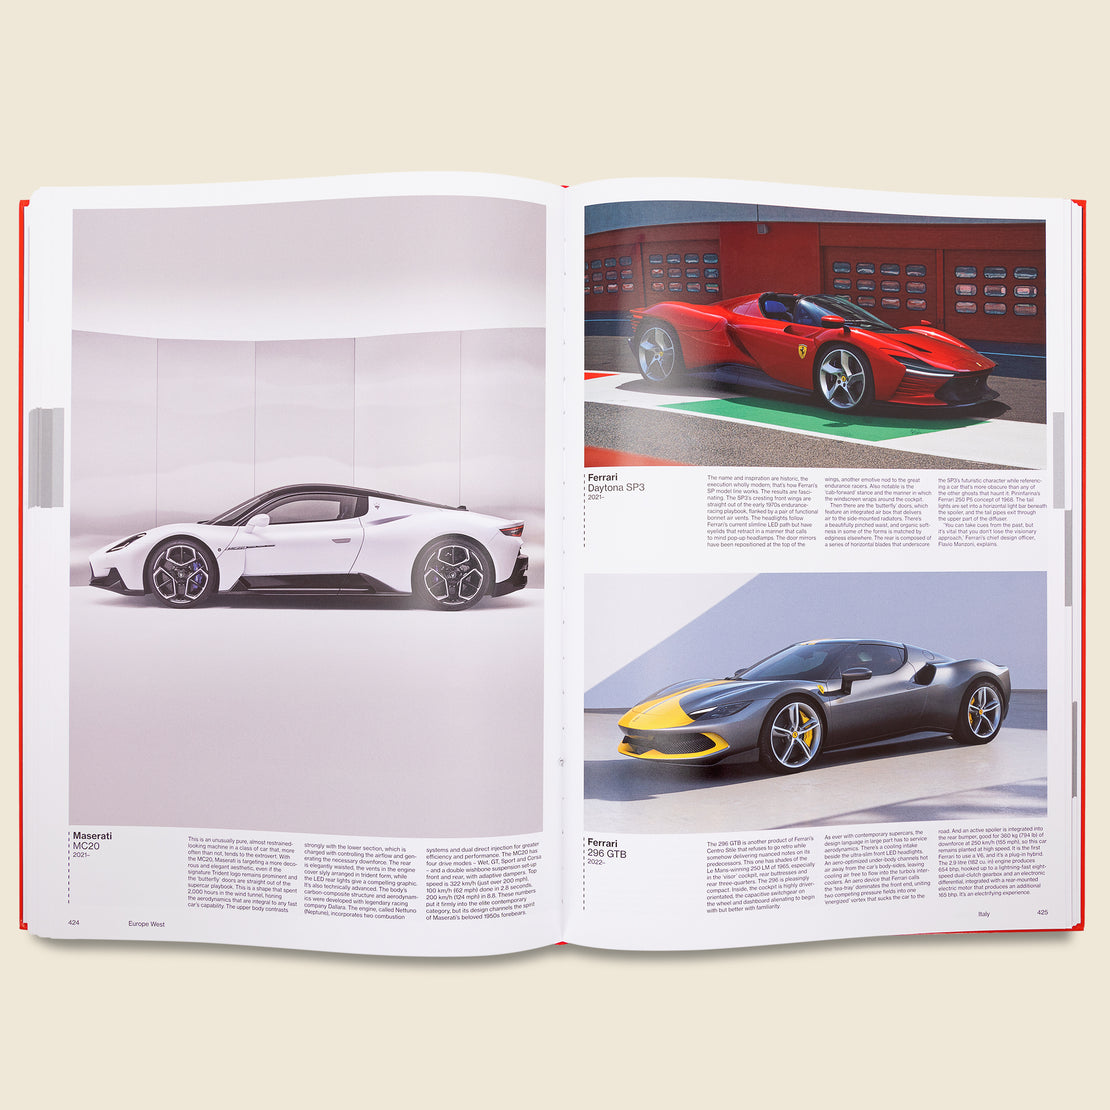 Atlas of Car Design: The World's Most Iconic Cars - Bookstore - STAG Provisions - Home - Library - Book